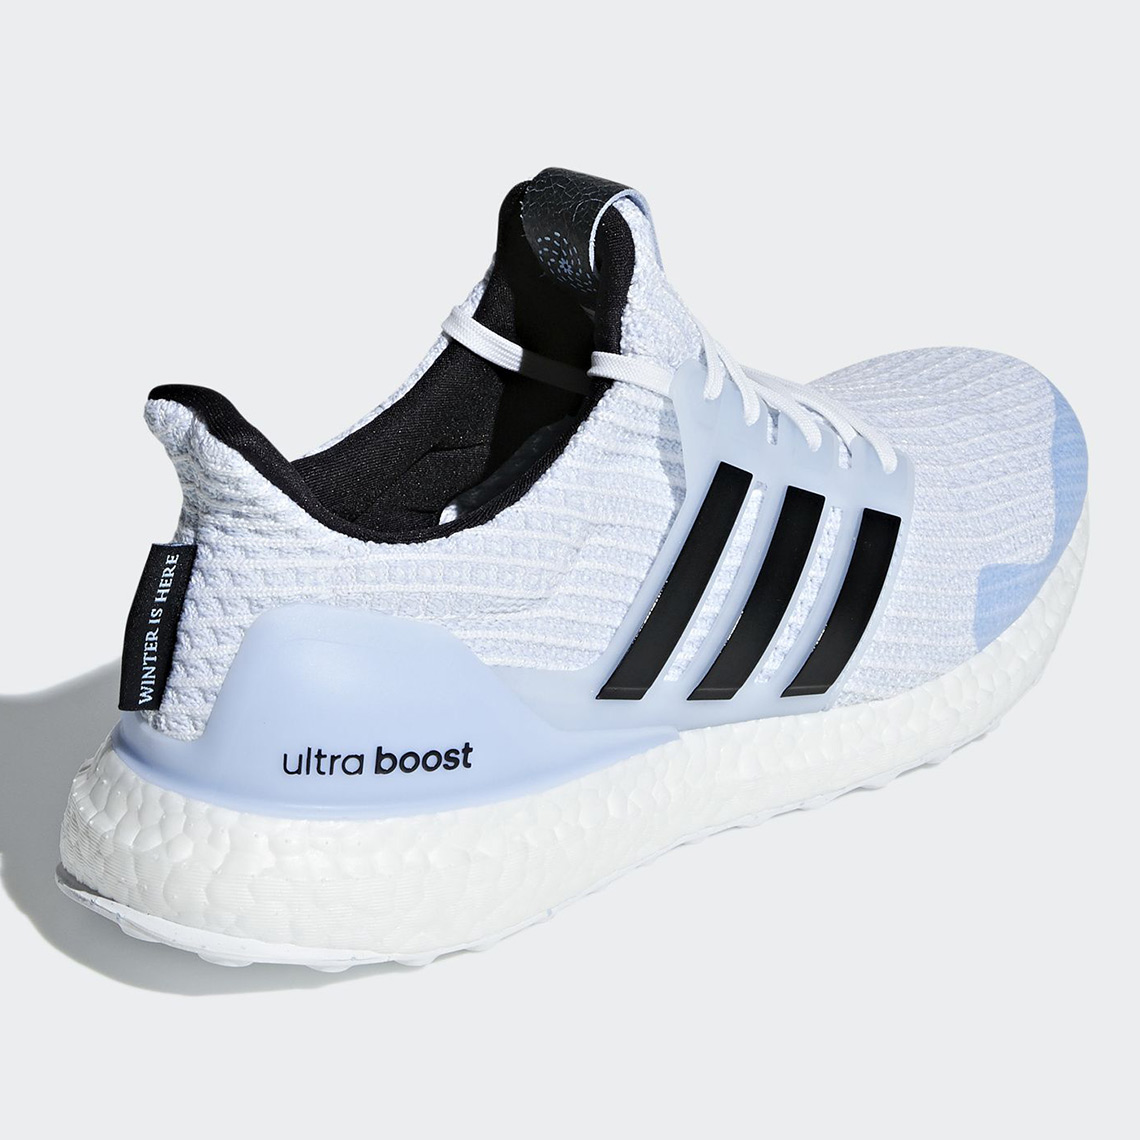 ultra boost winter is coming